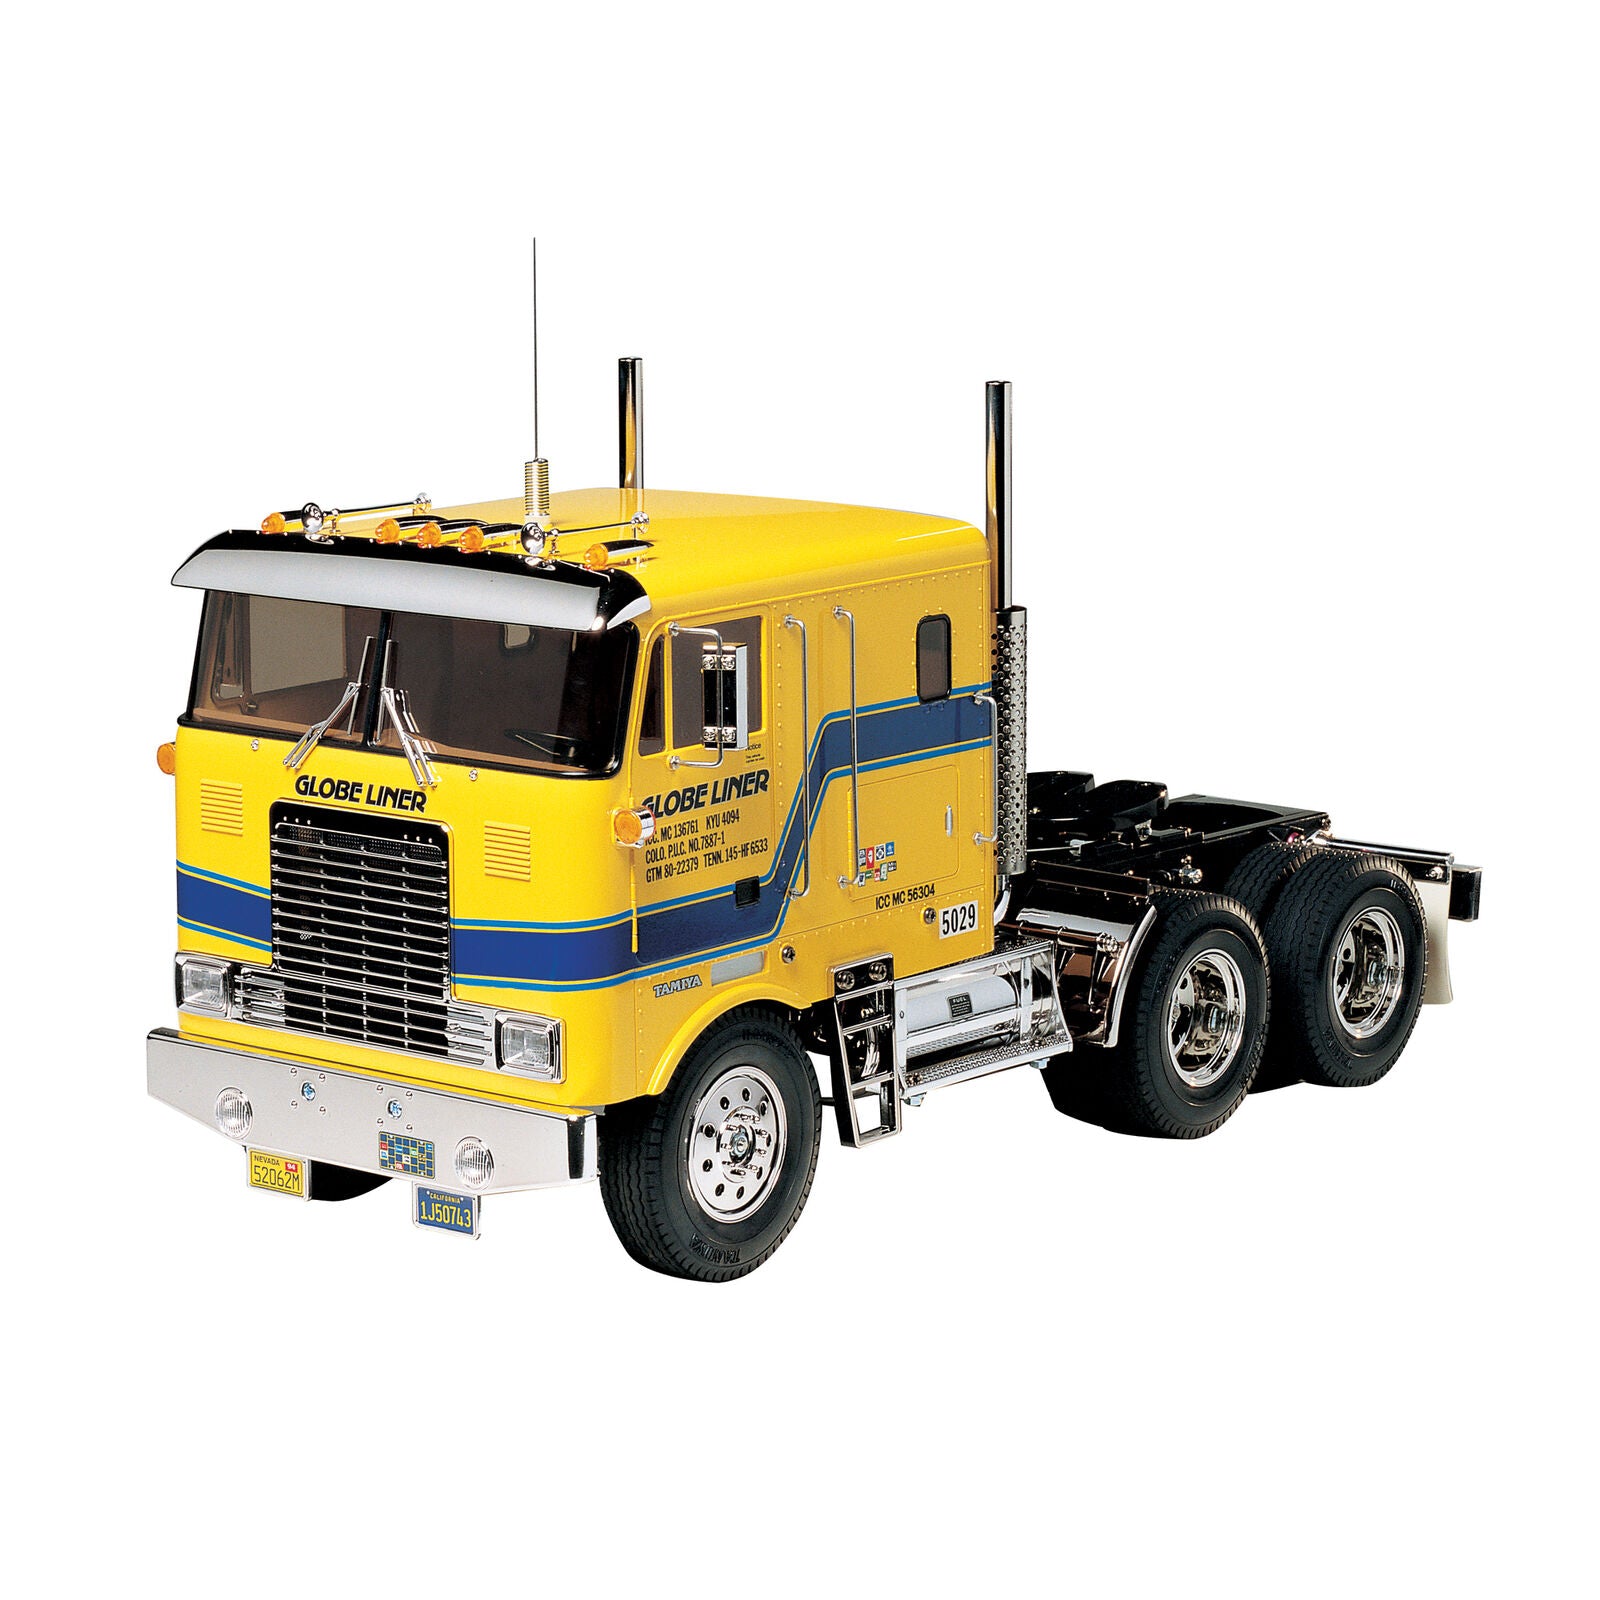 TAMIYA 56304 1/14 Globe Liner RWD Scale Electric Cabover Semi-Truck Kit